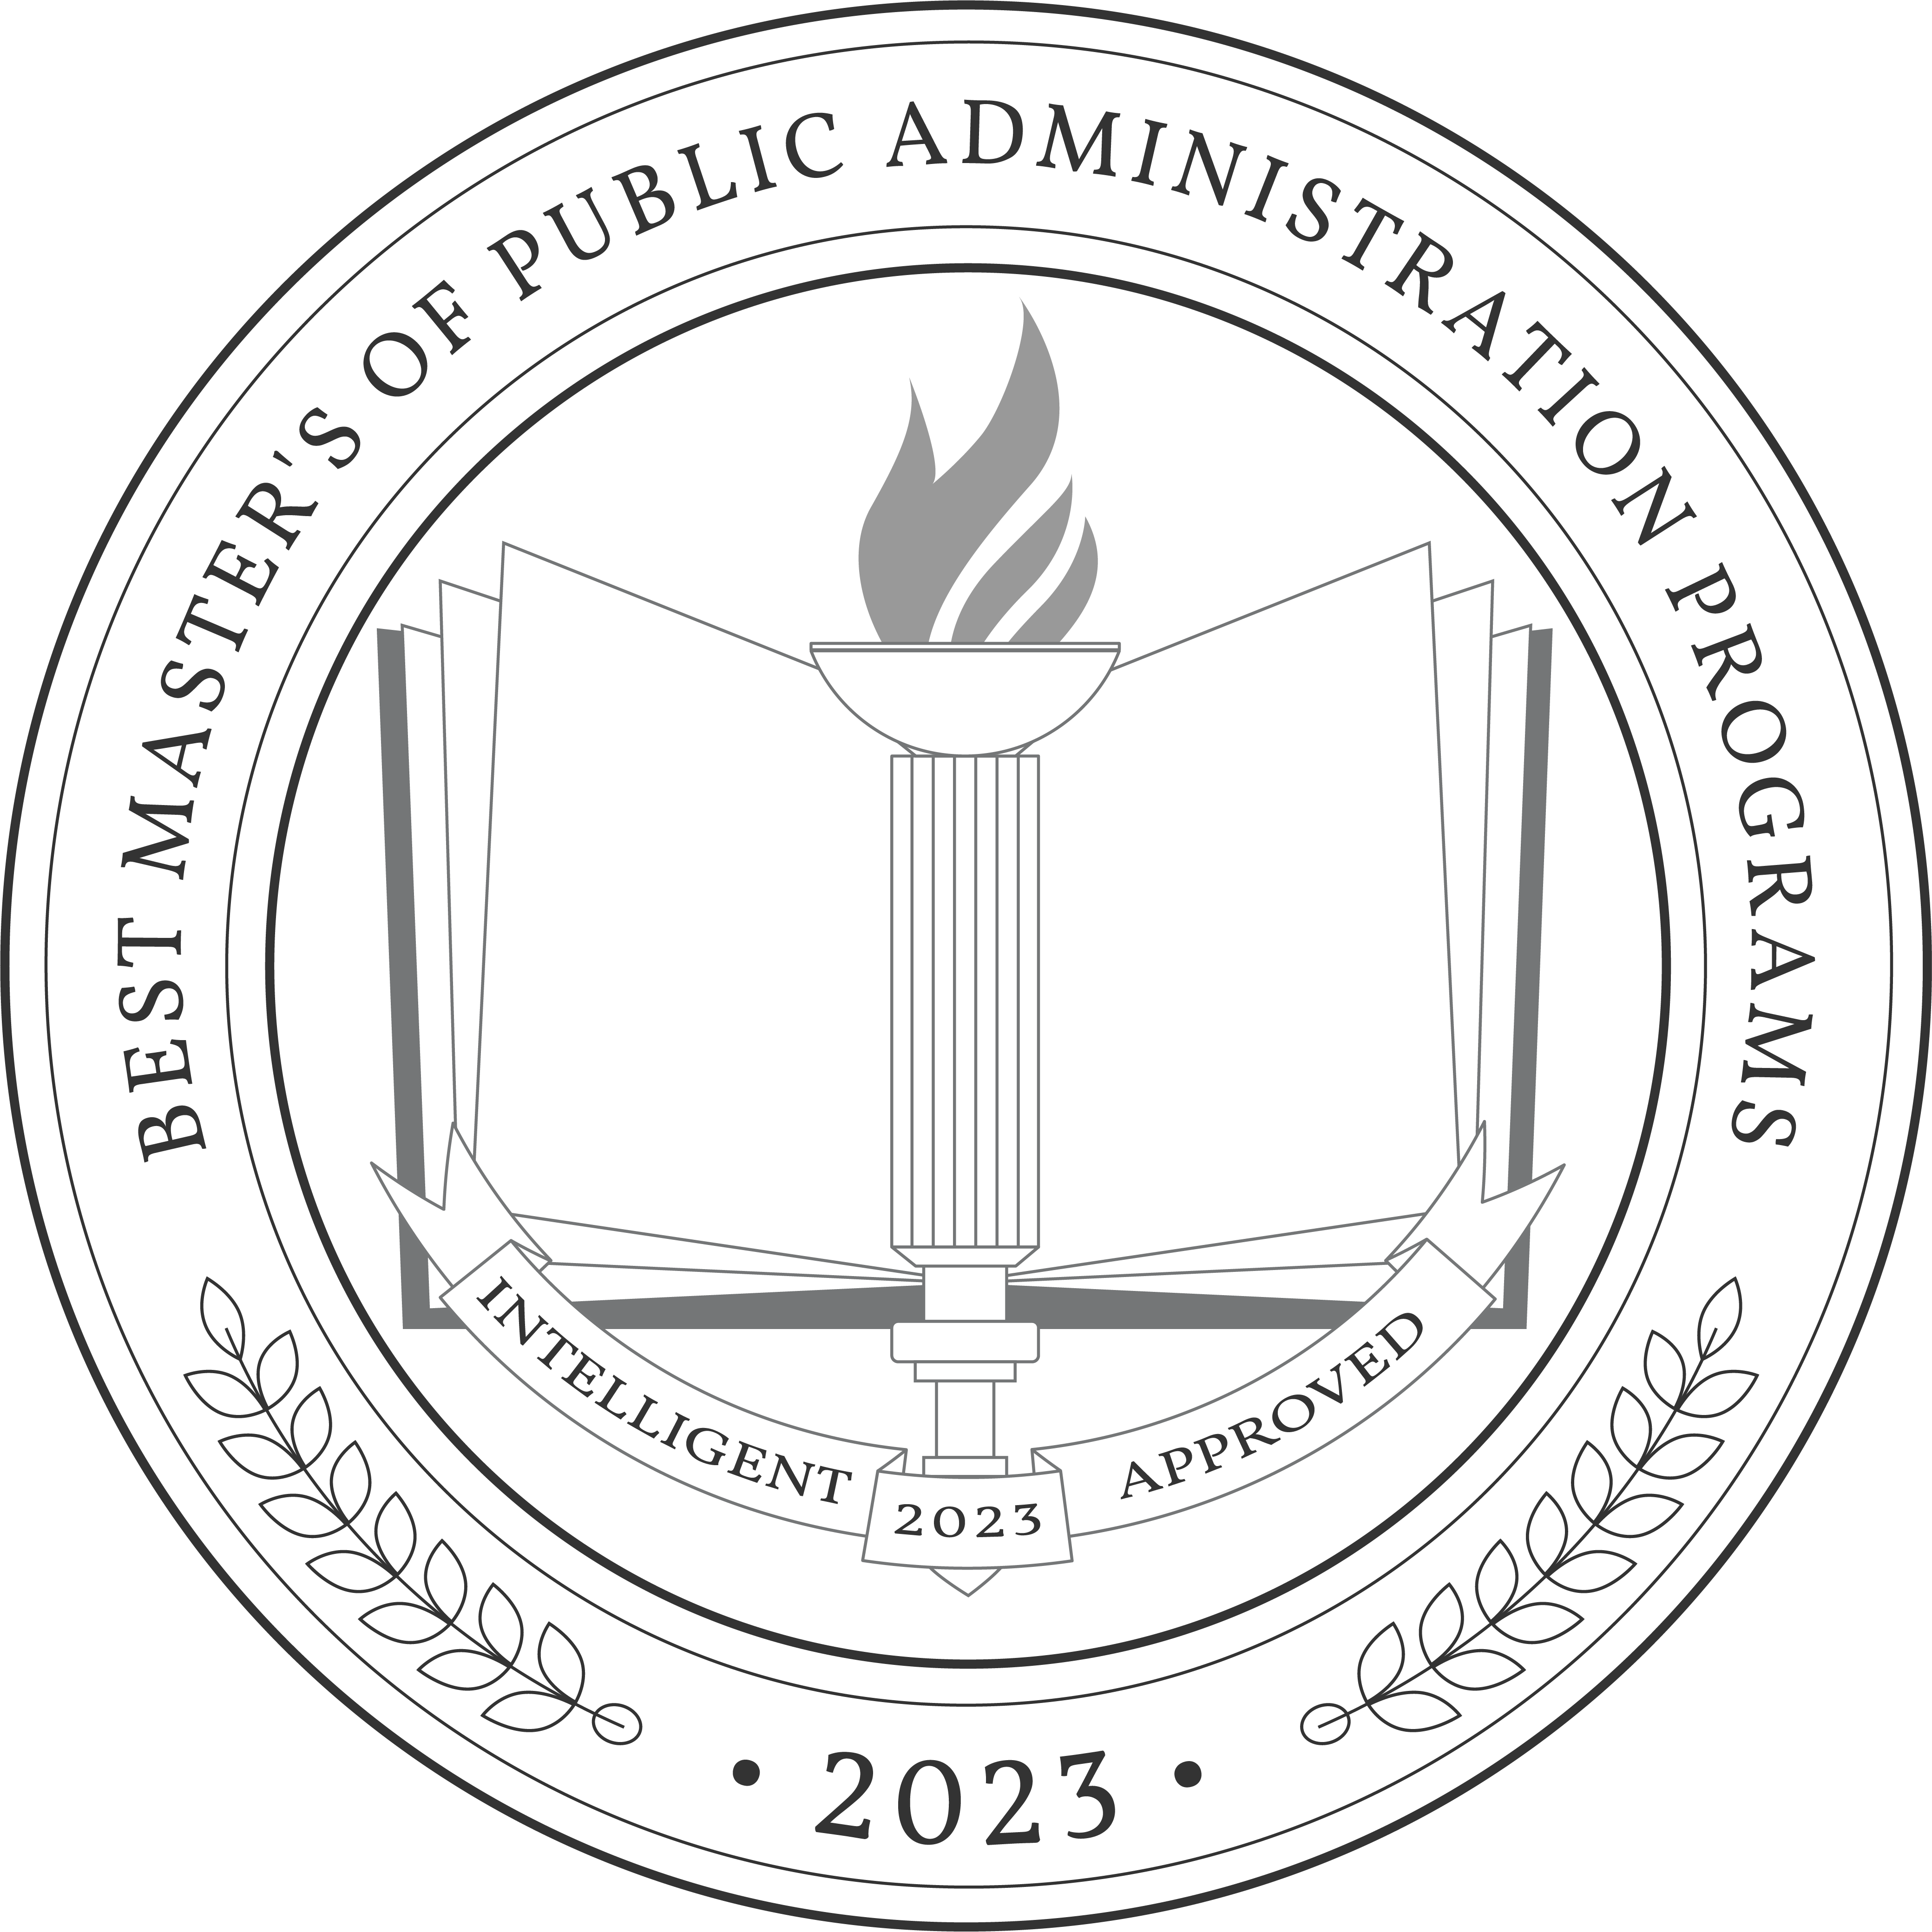 Best Master's of Public Administration Programs 2023